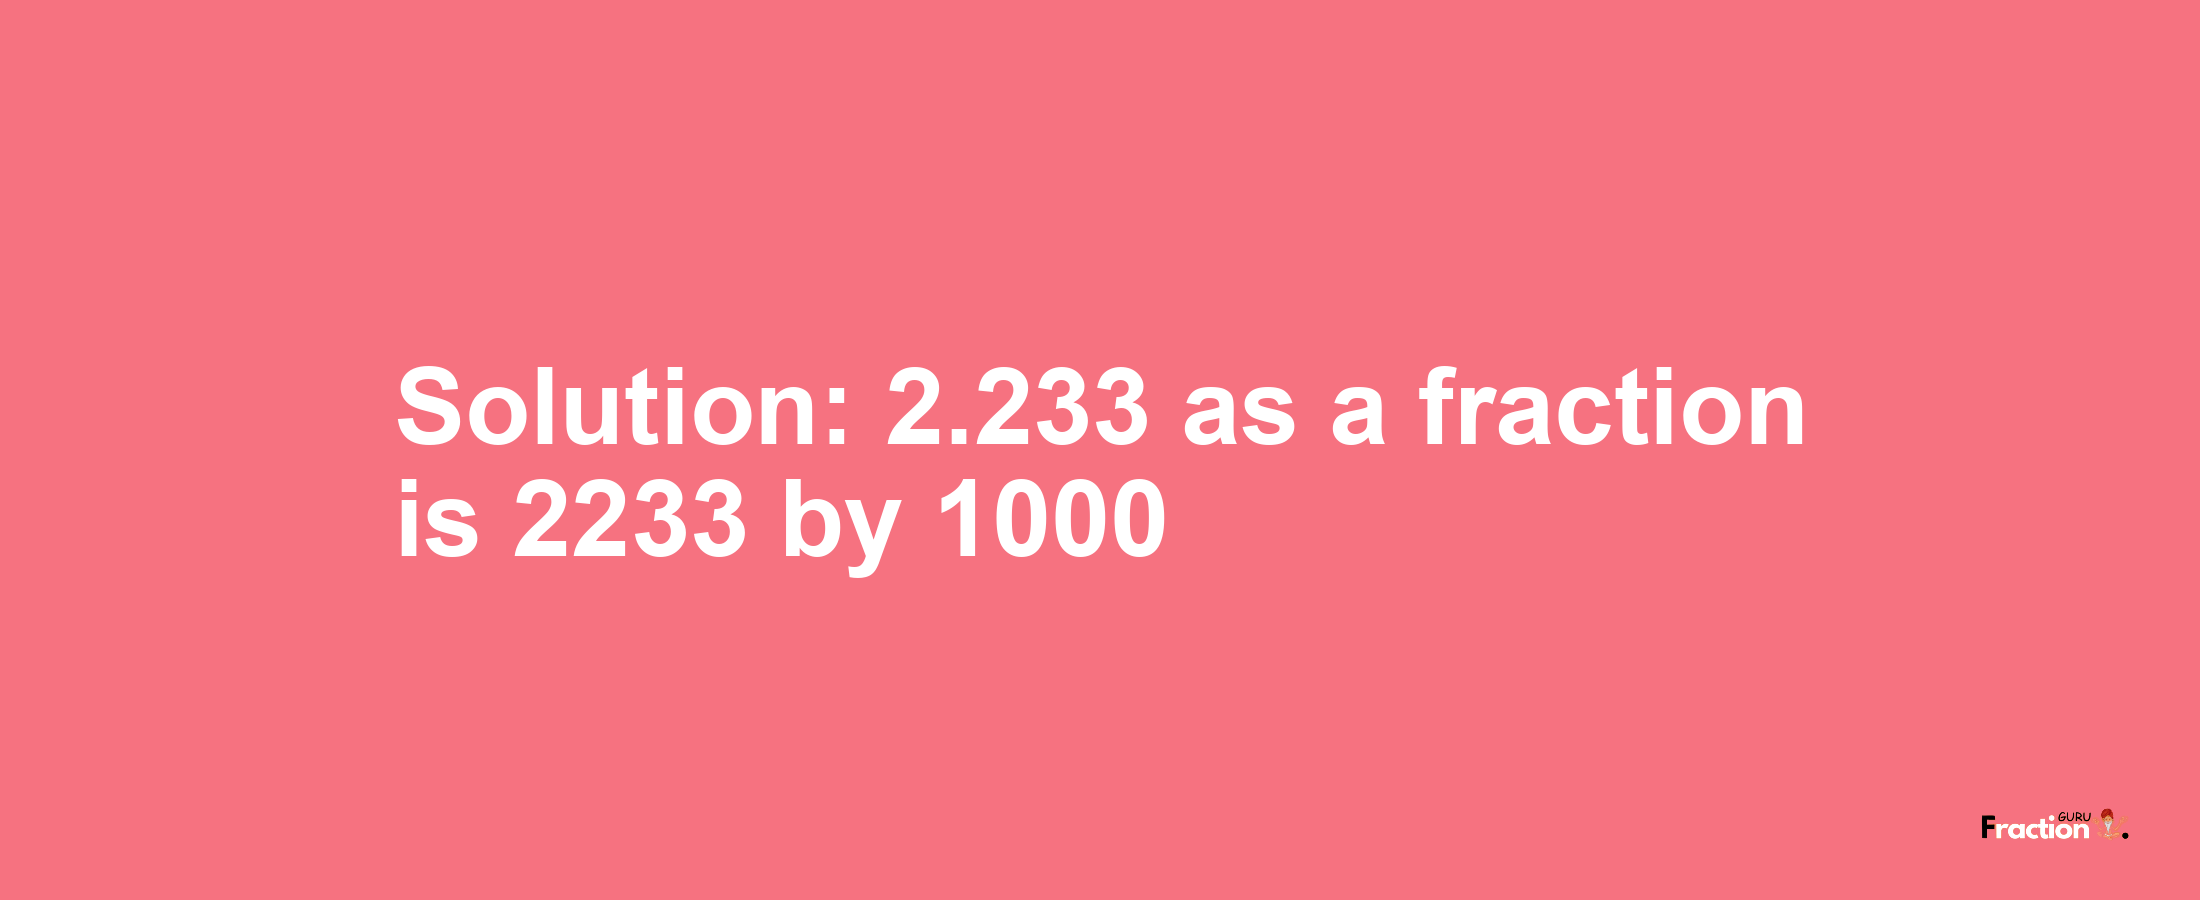 Solution:2.233 as a fraction is 2233/1000